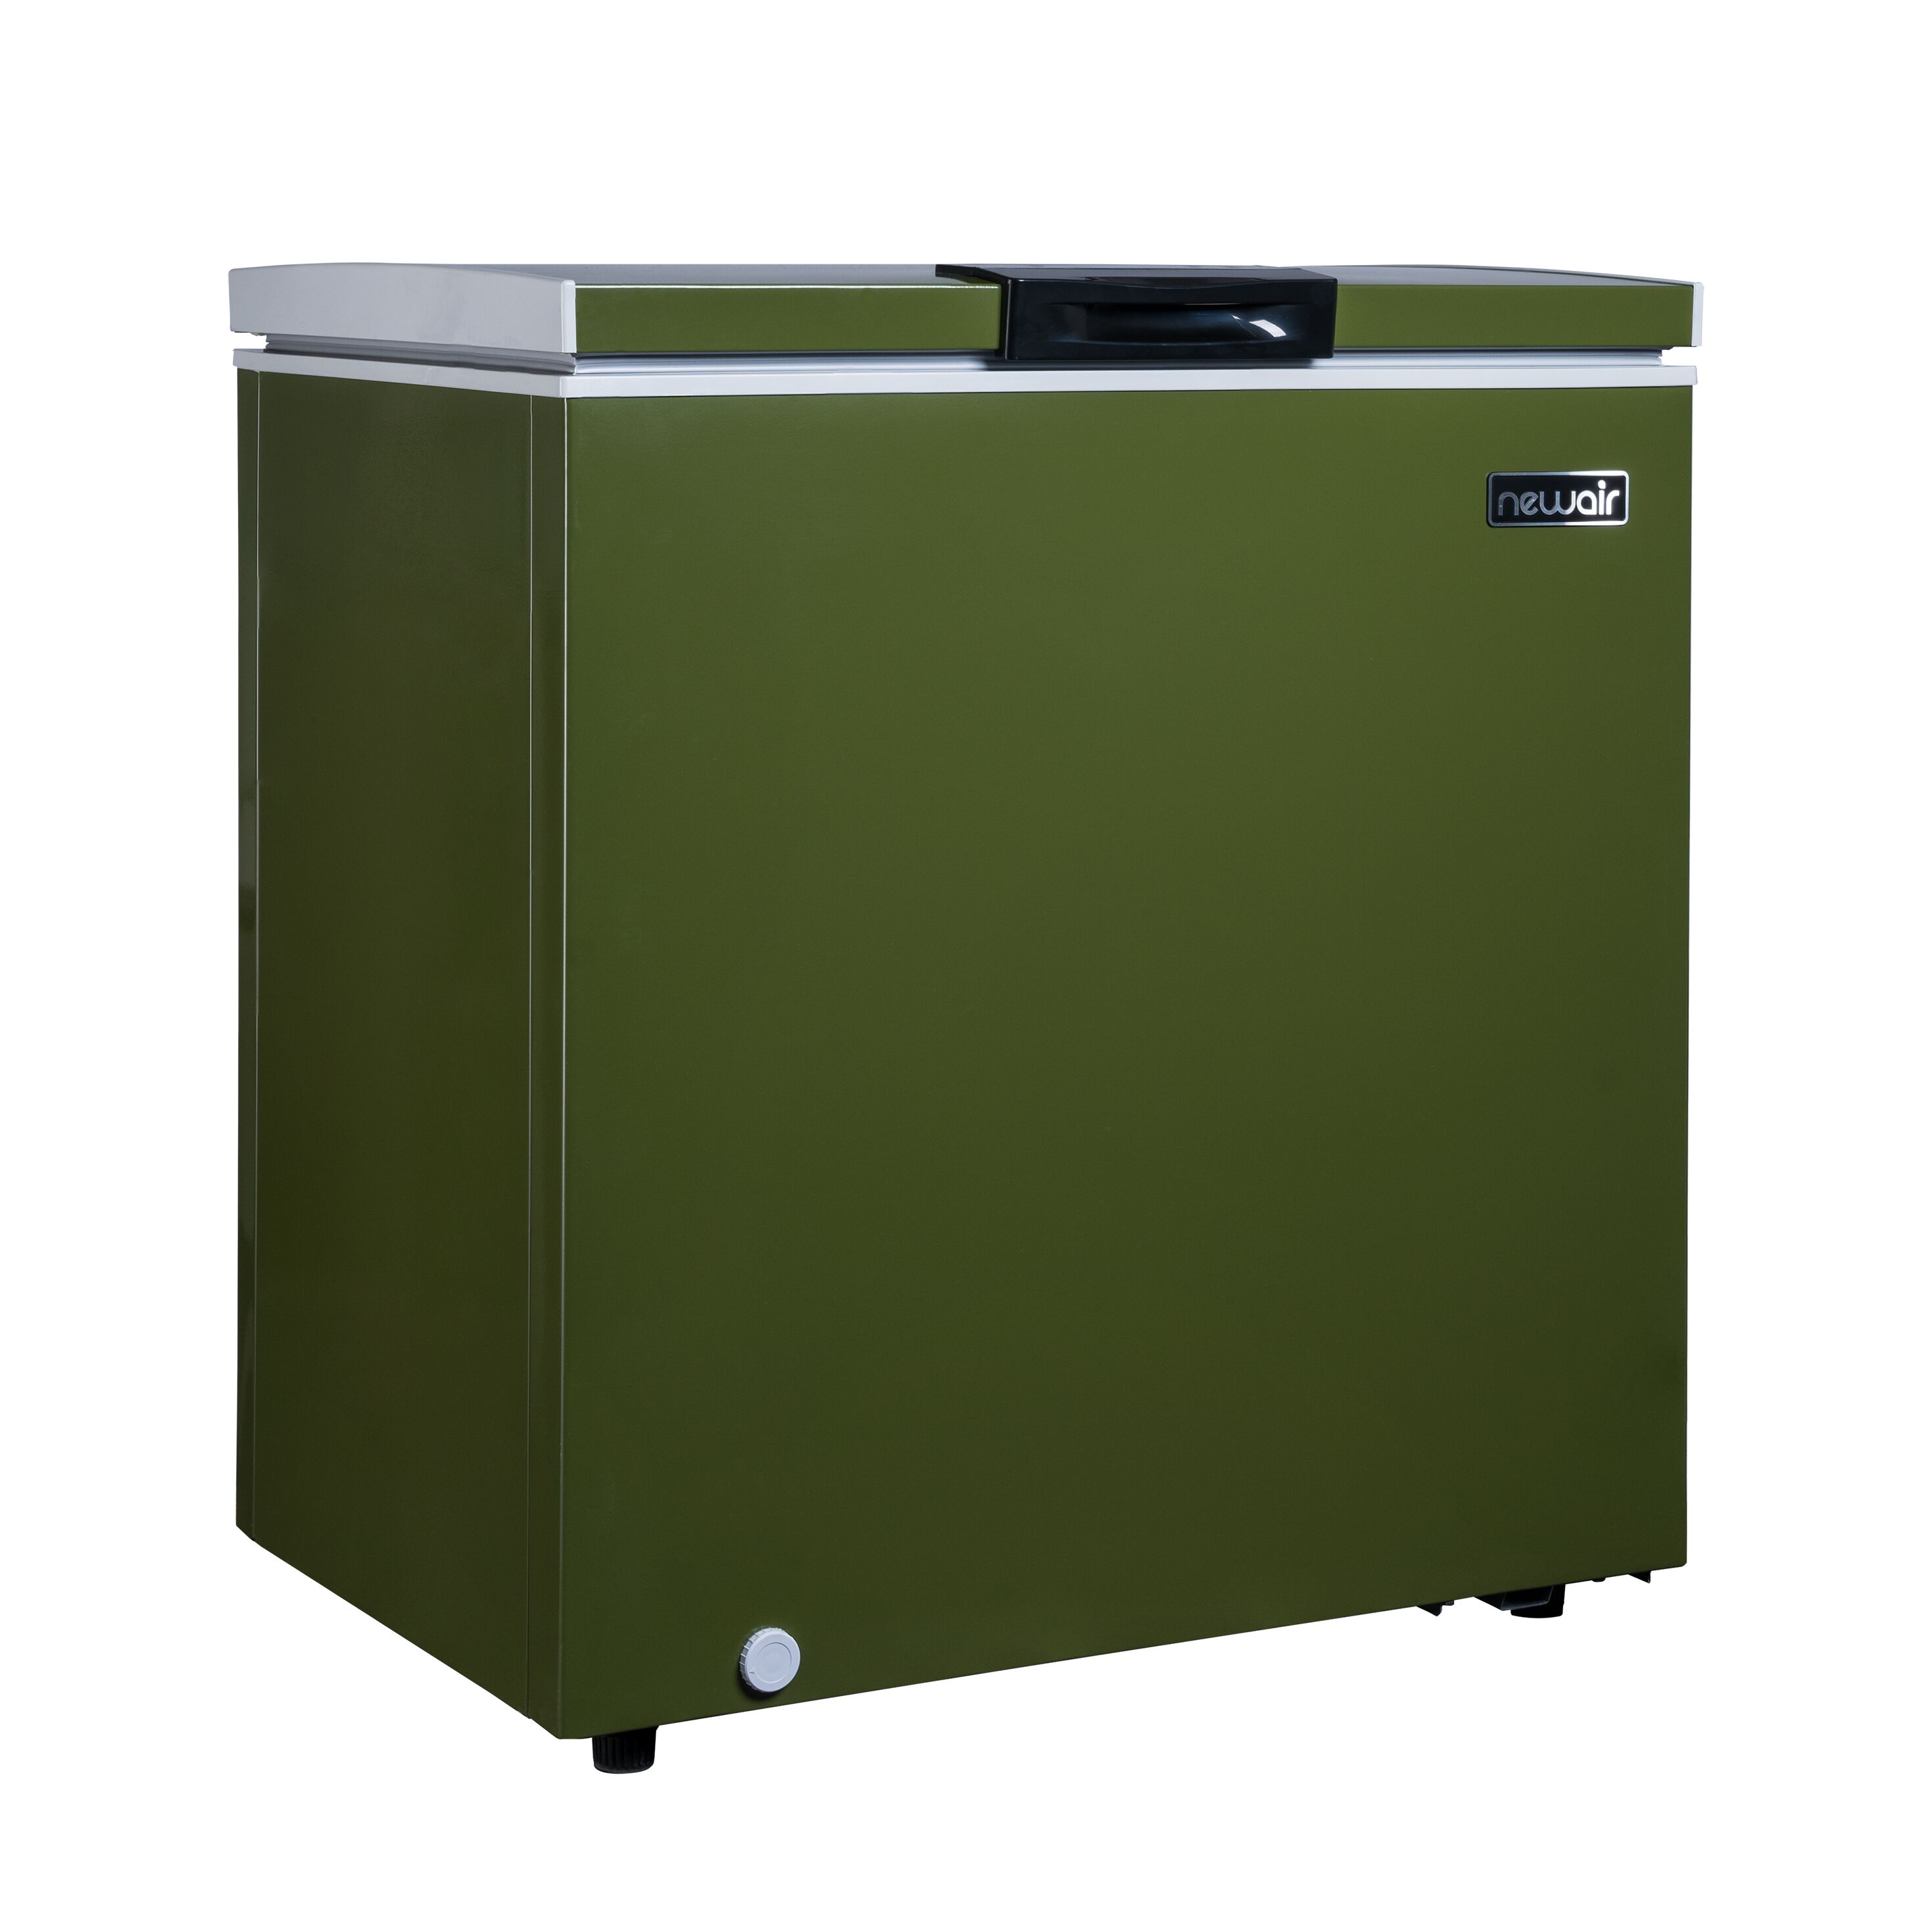 33.3 Inch Tall Chest Freezers at